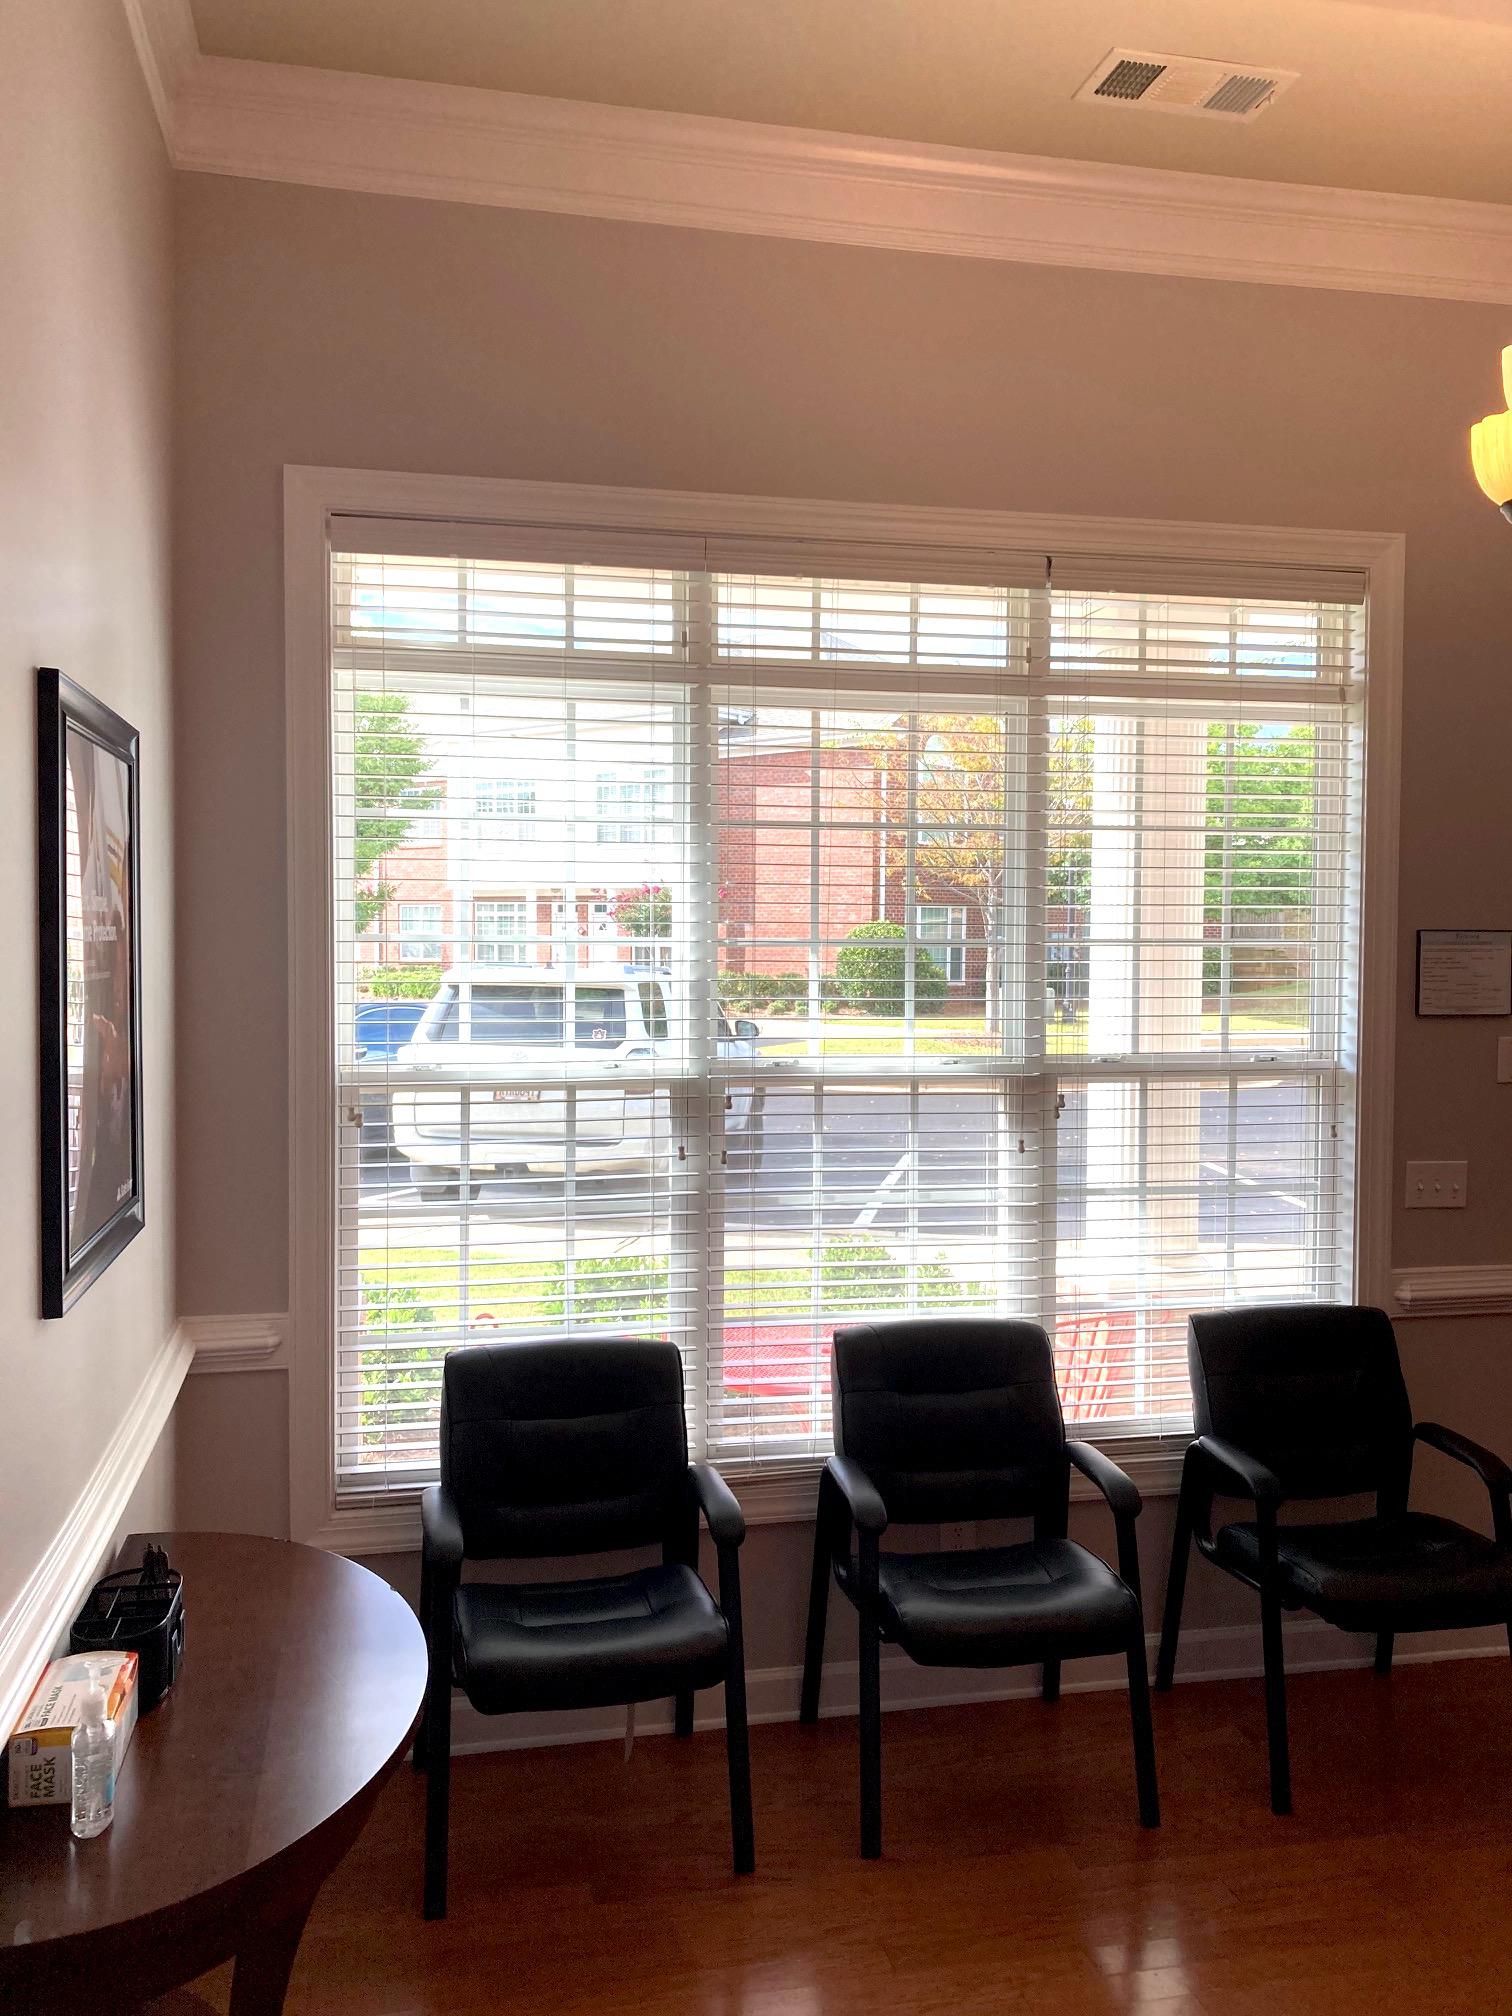 Our office is coming together so nicely! Michael Popwell - State Farm Insurance Agent Suwanee (470)202-6131